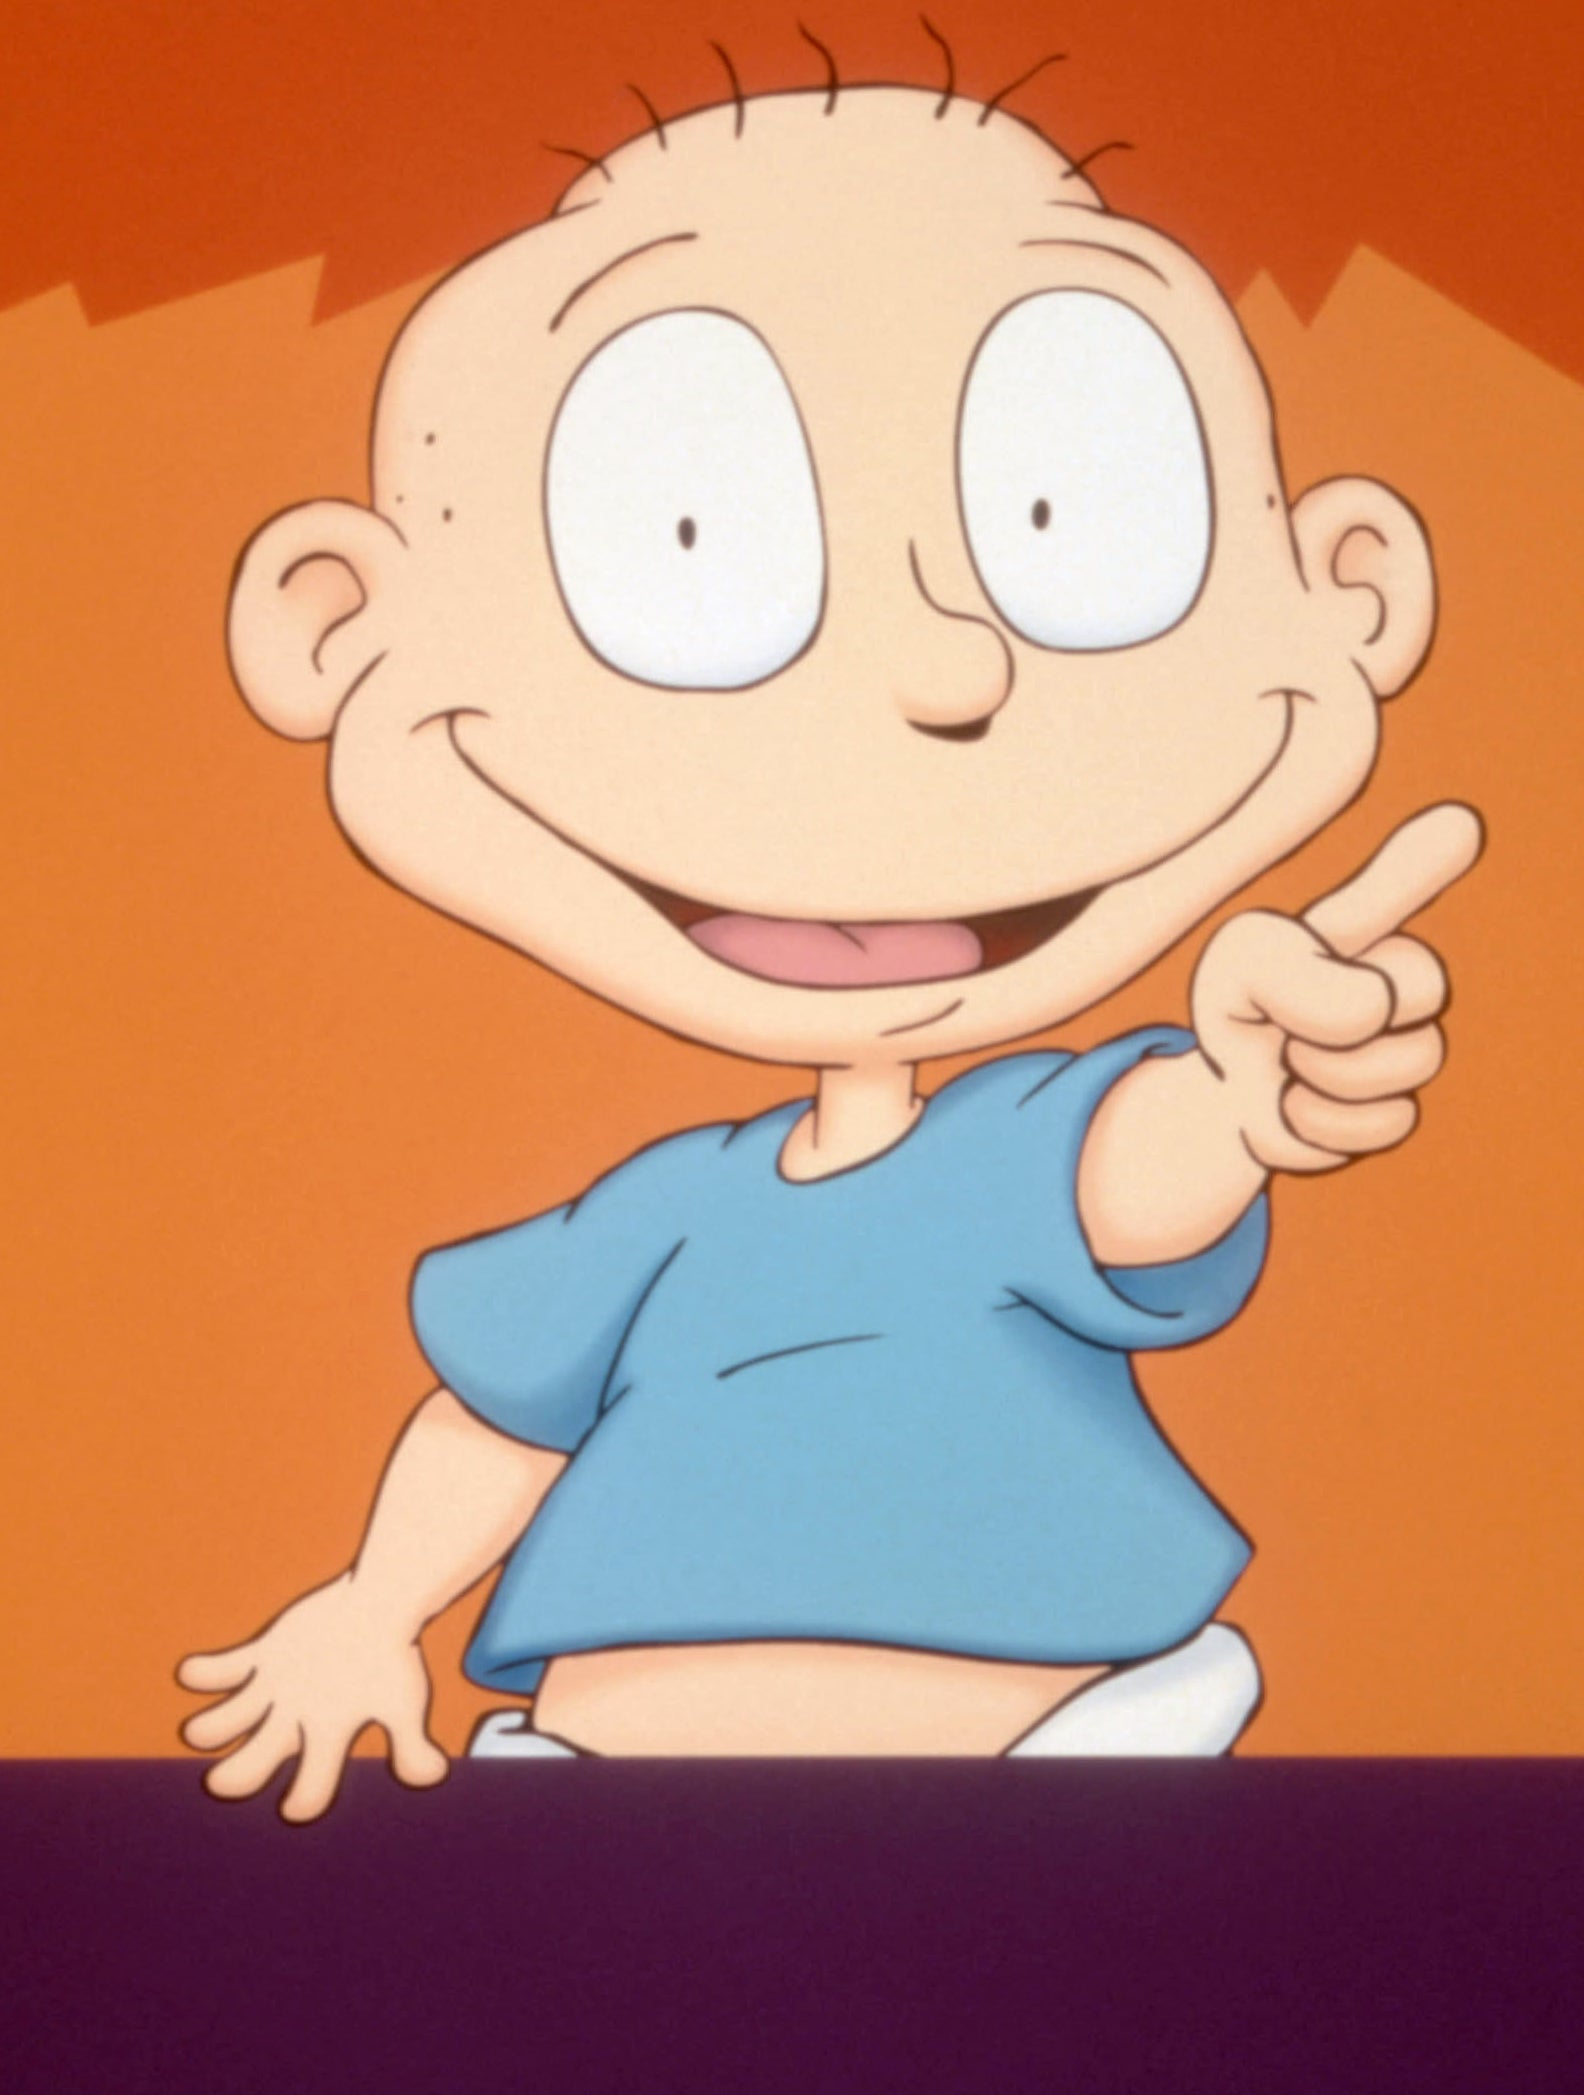 Tommy Pickles in Rugrats